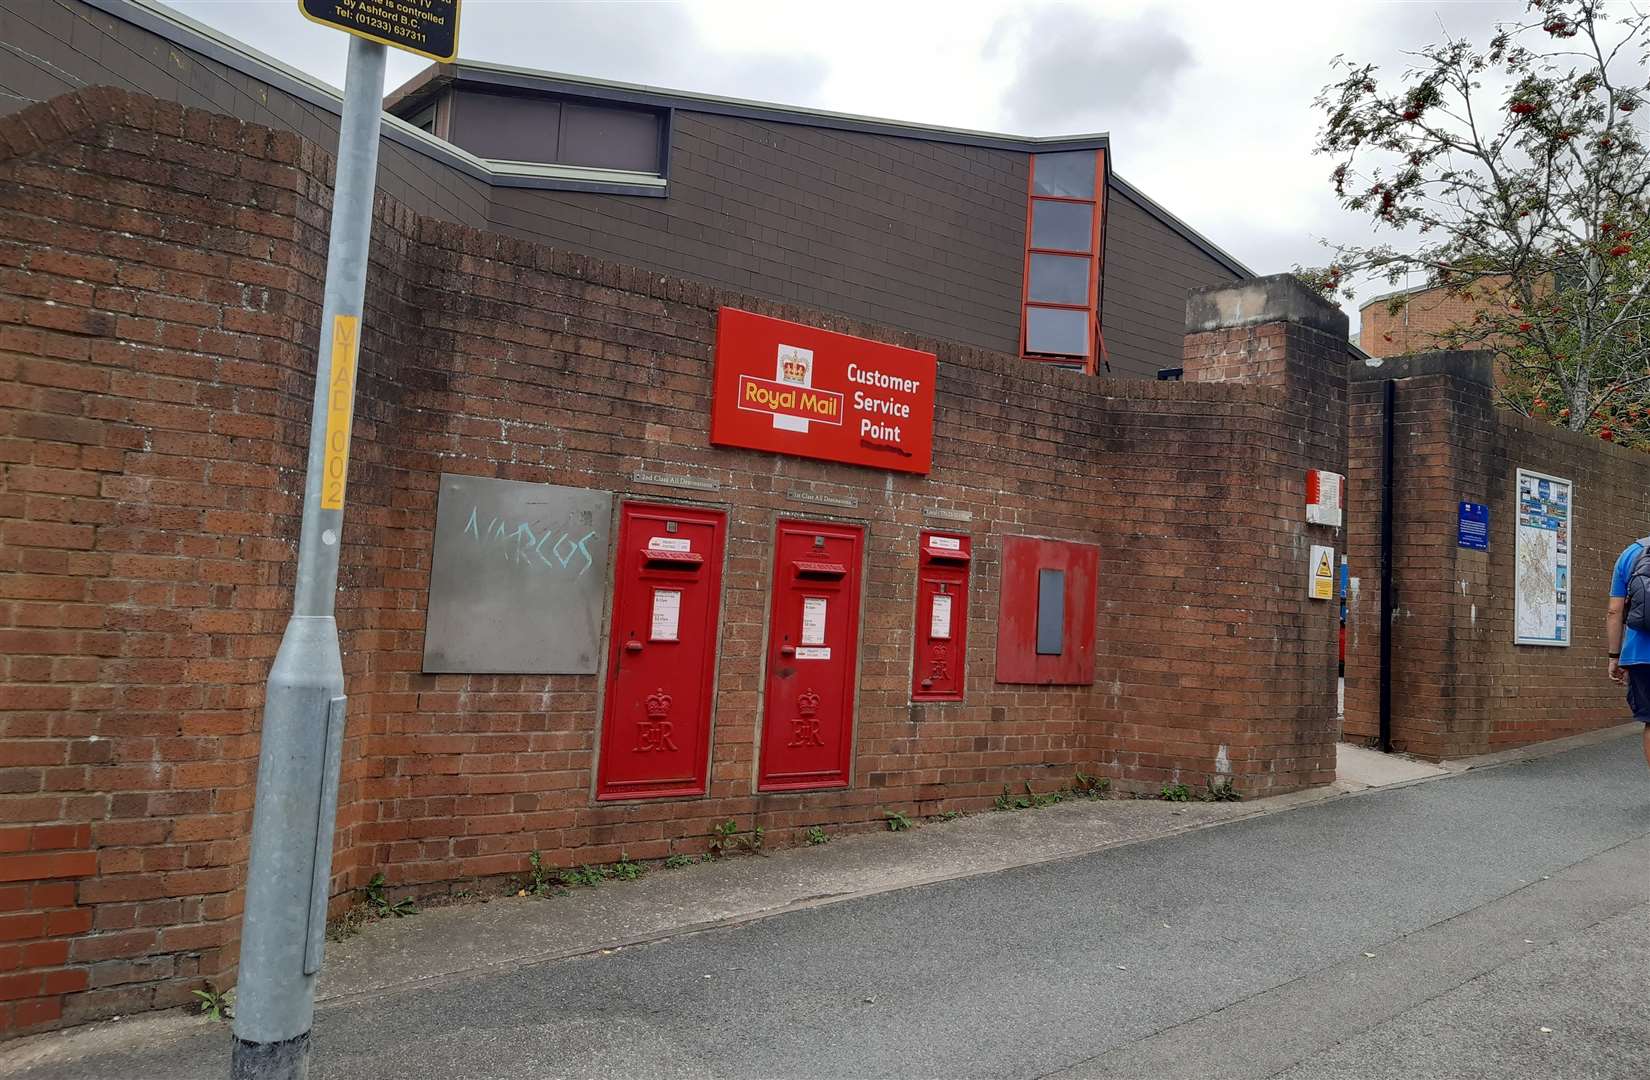 The sorting office is in Tannery Lane just off the ring road